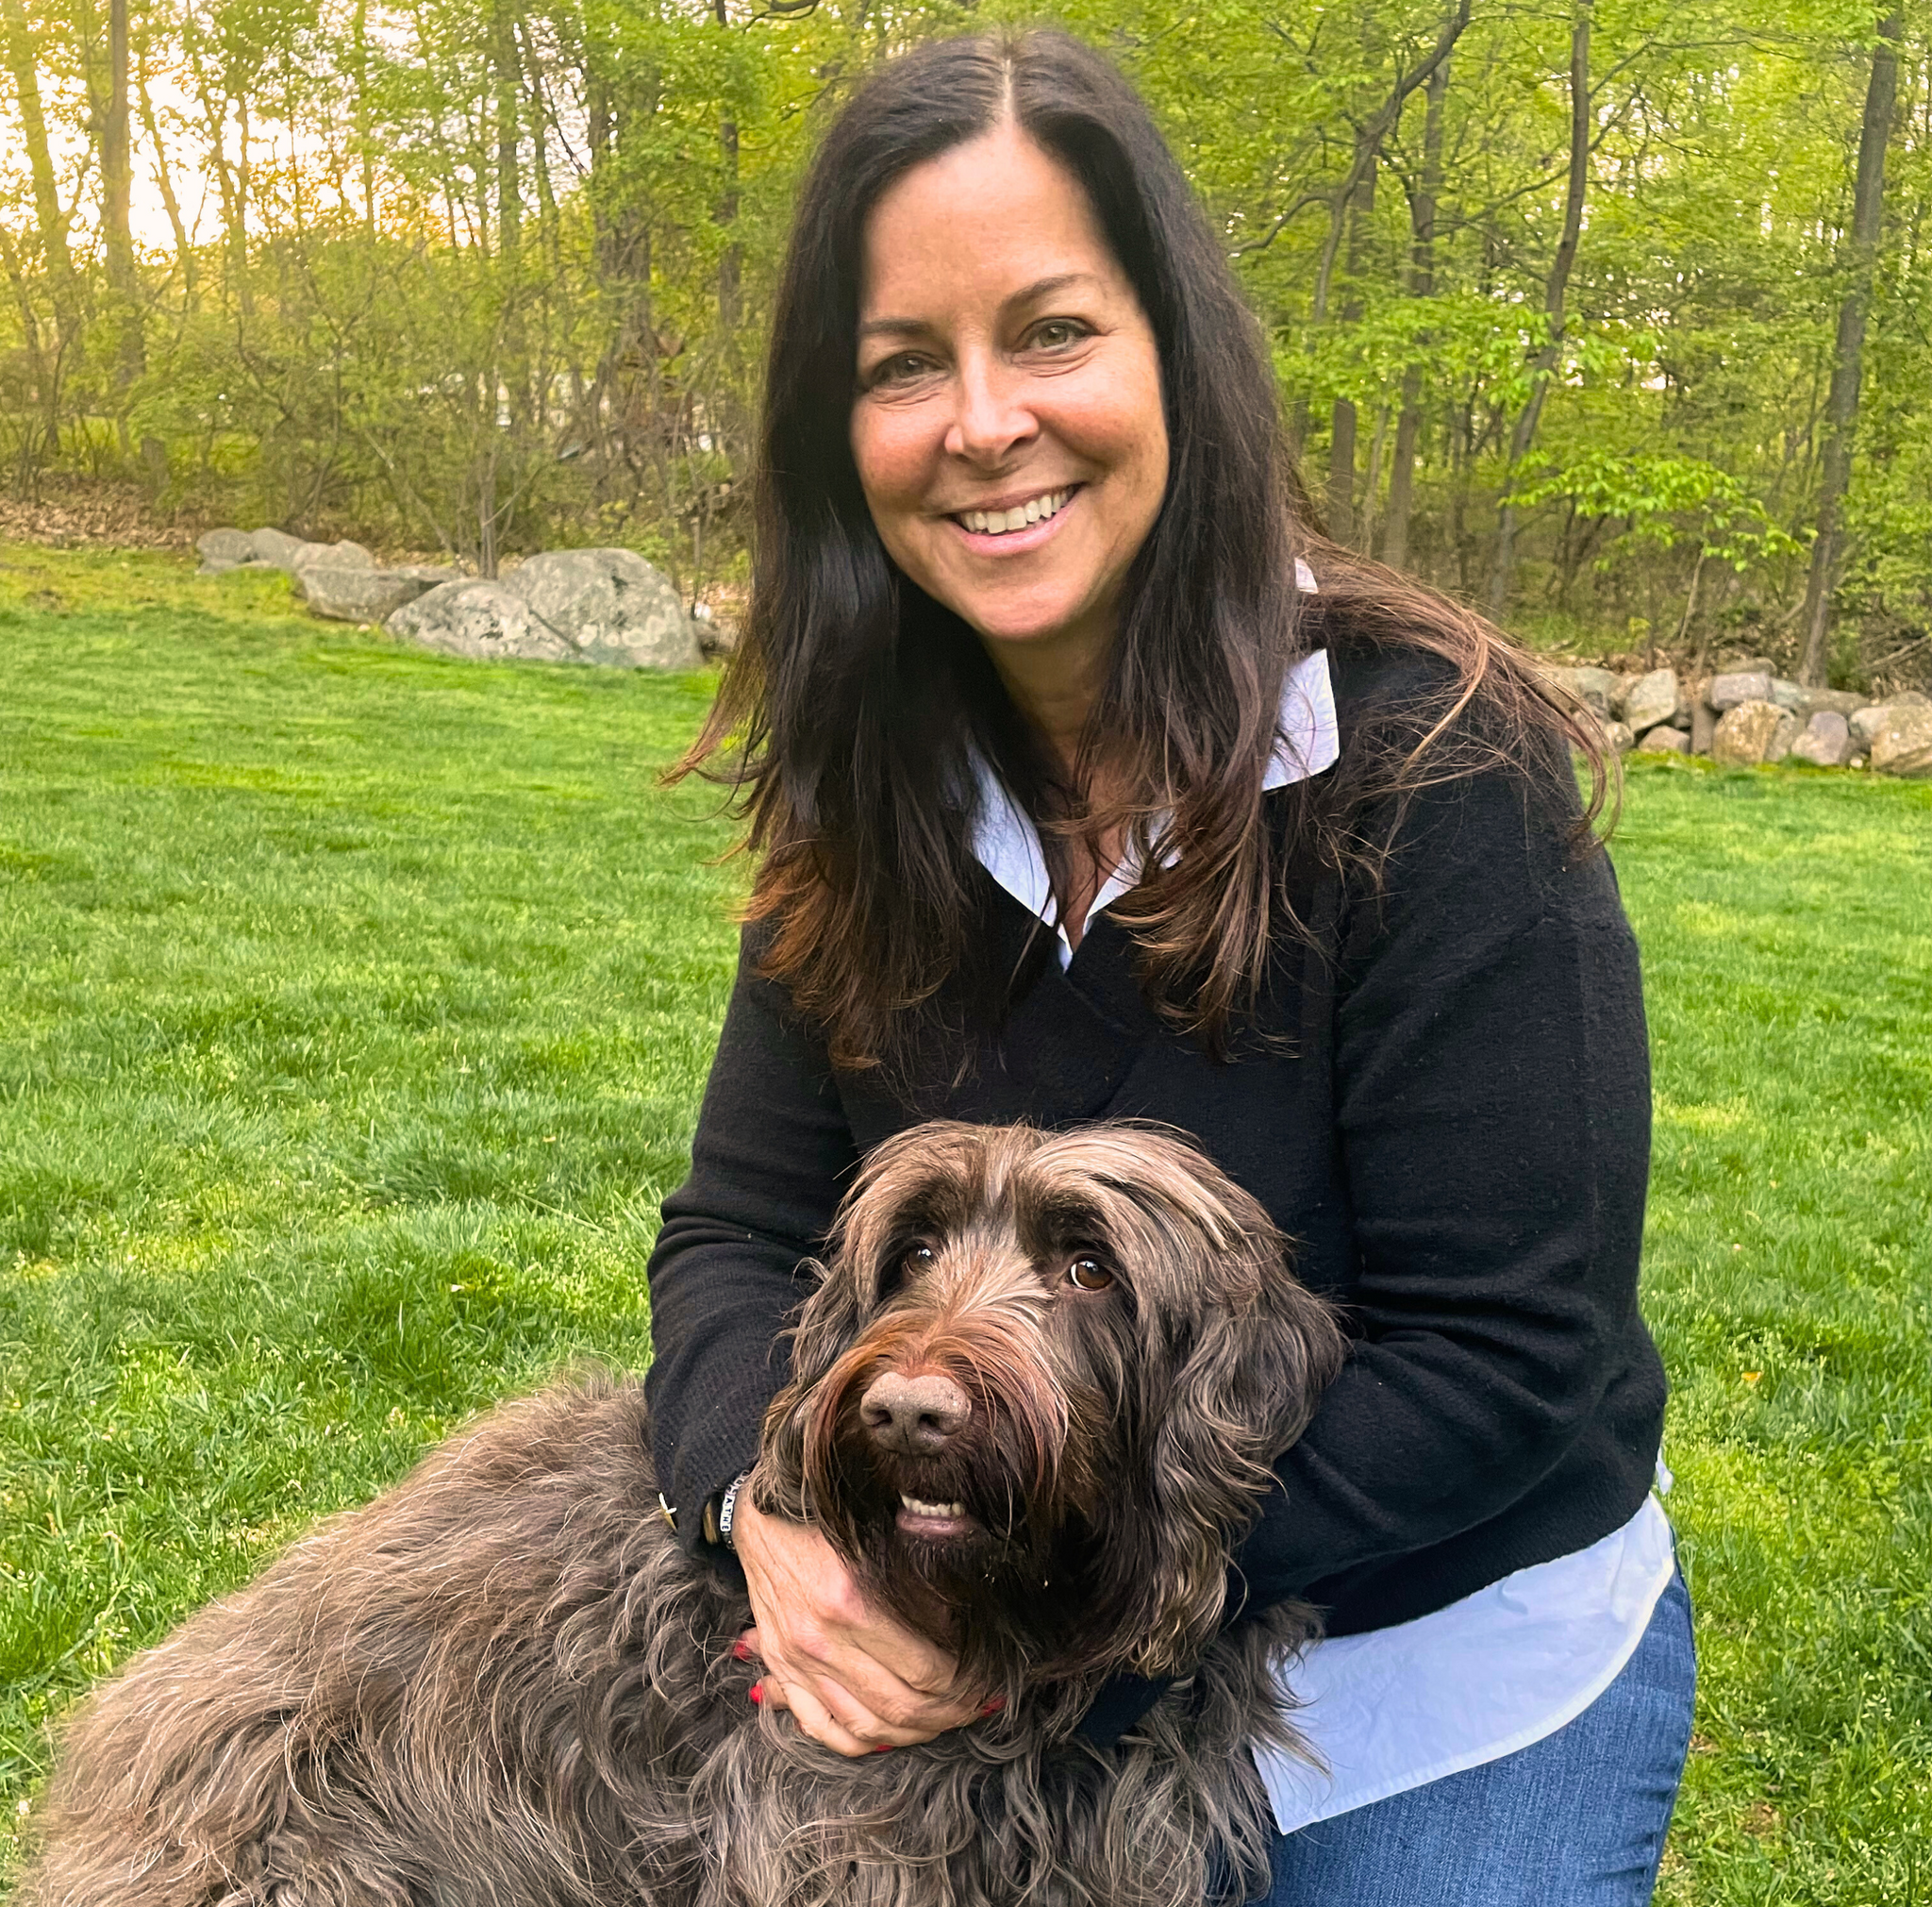 Maria Dalhausser, Trade Operations Specialist, posed with dog, Mabel.